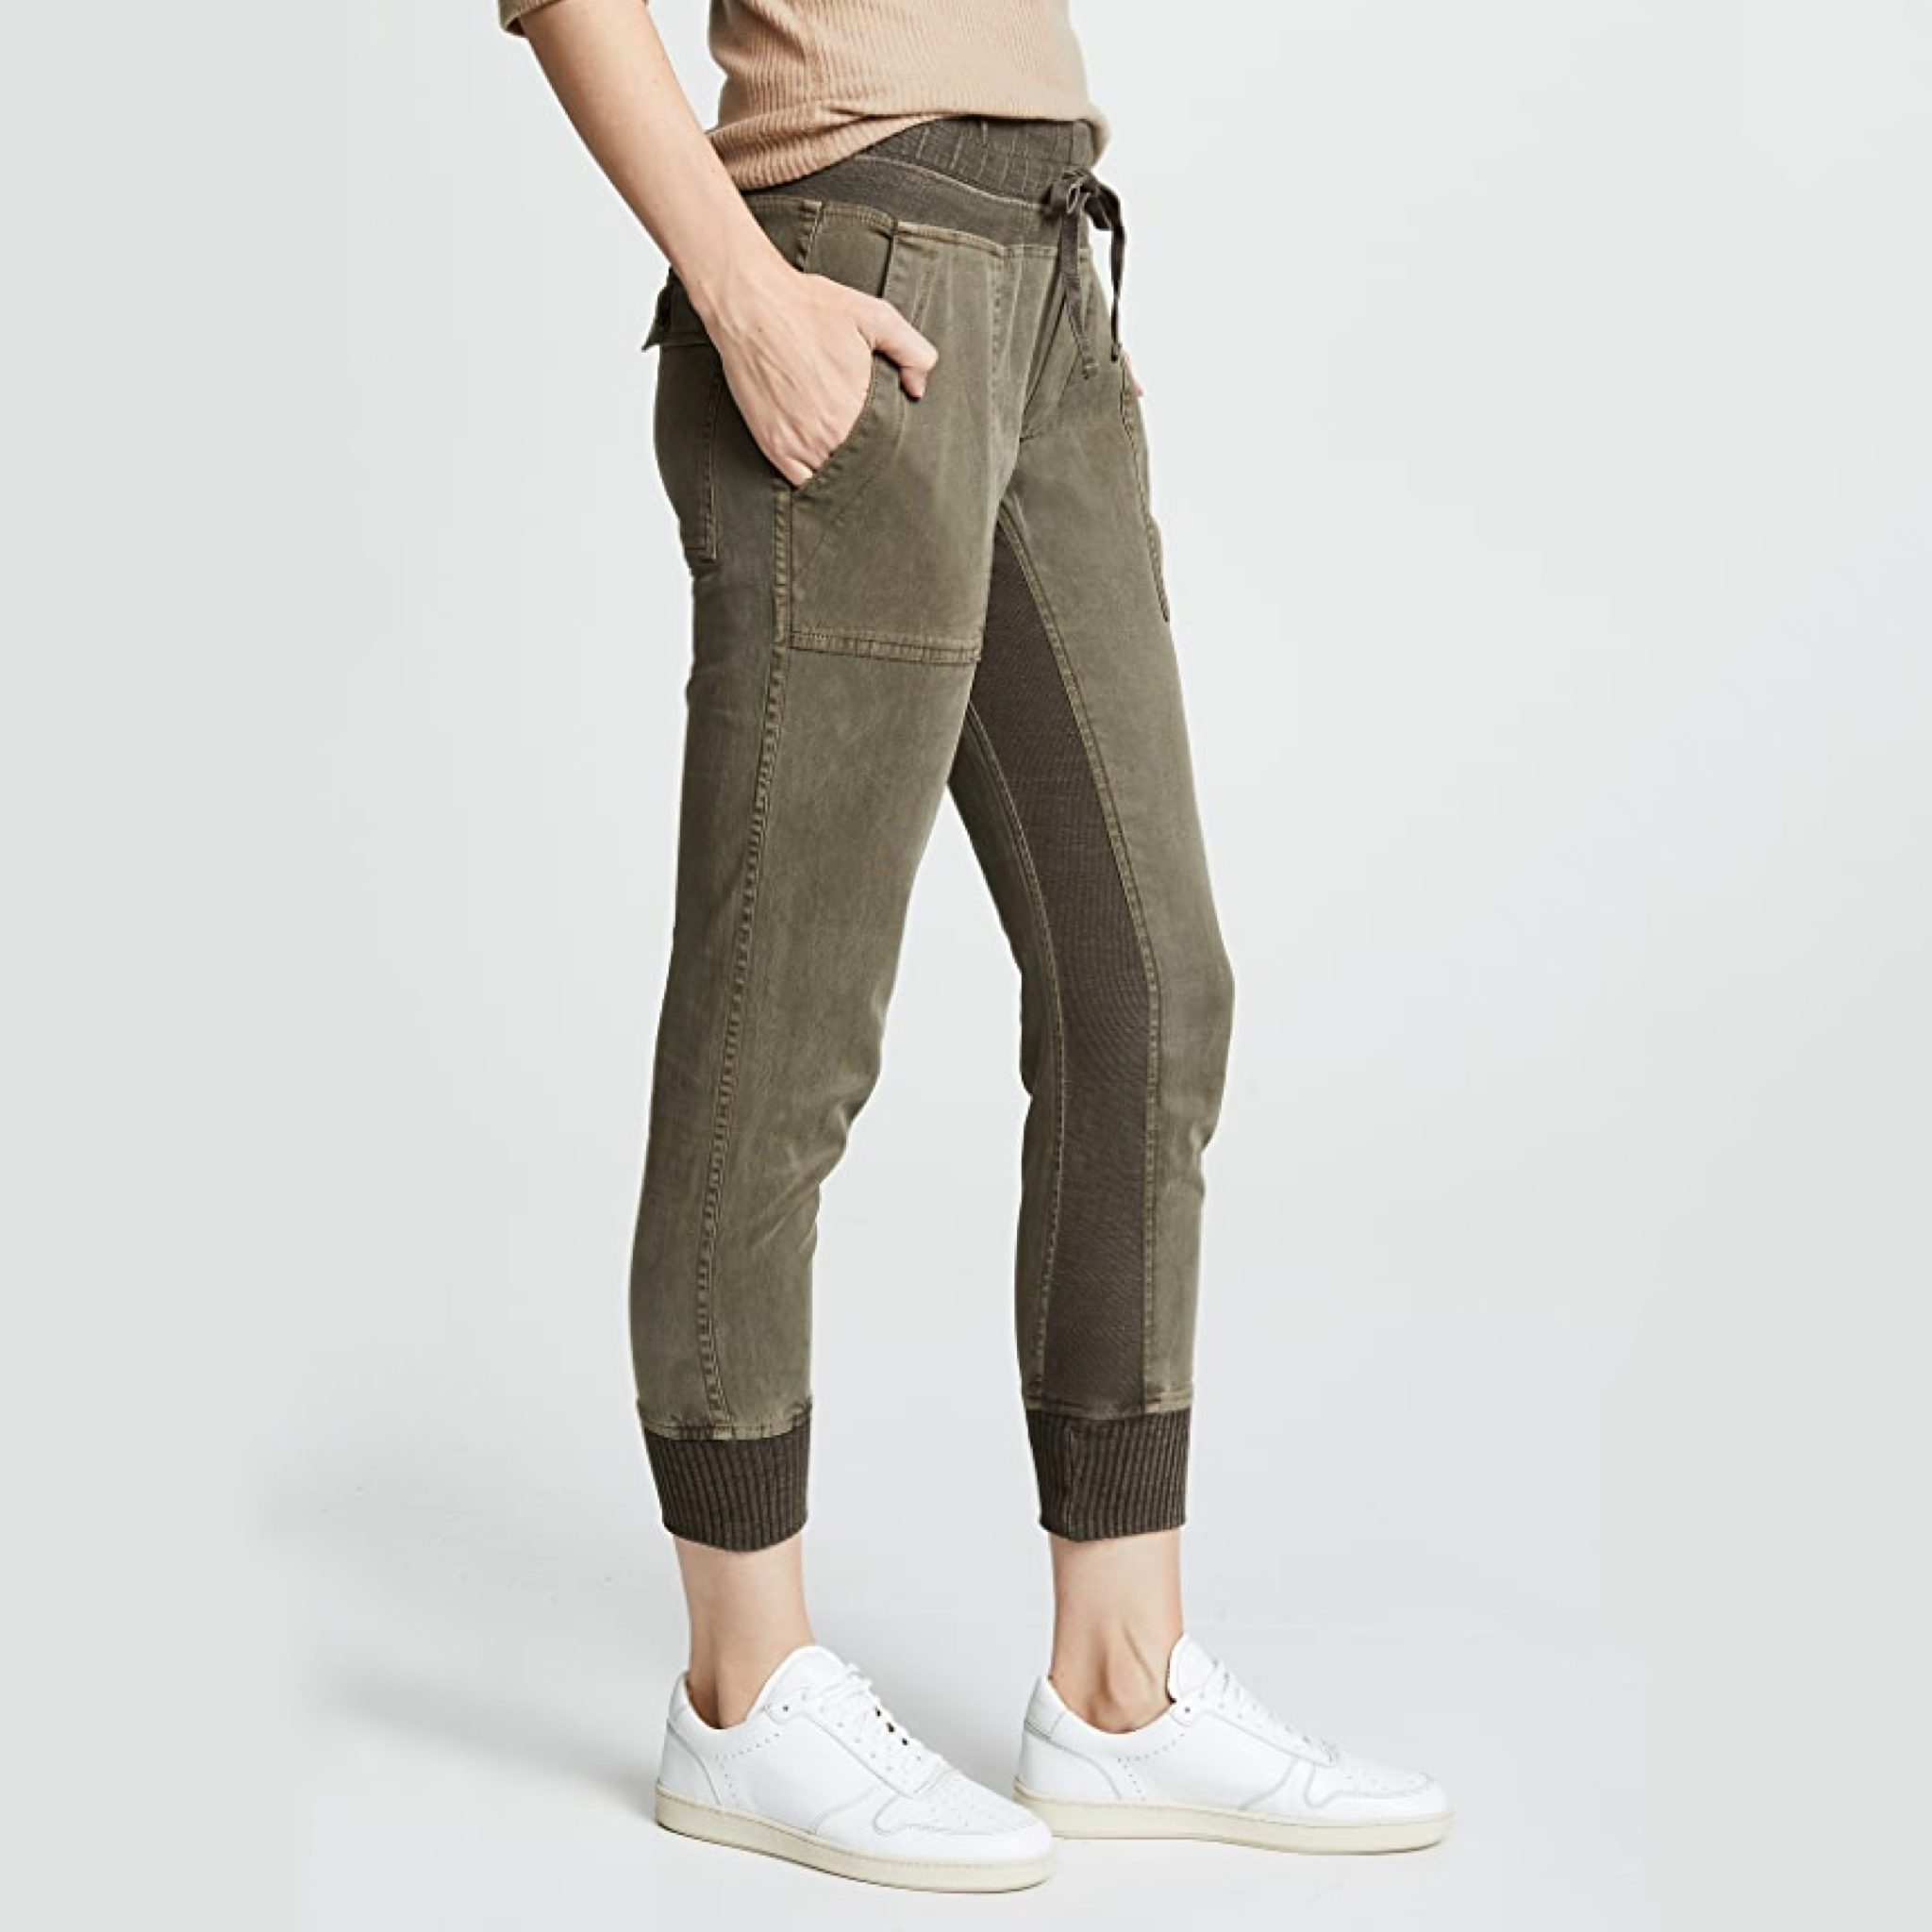 James Perse Mixed Media Pant-army green pigment – jeantherapy